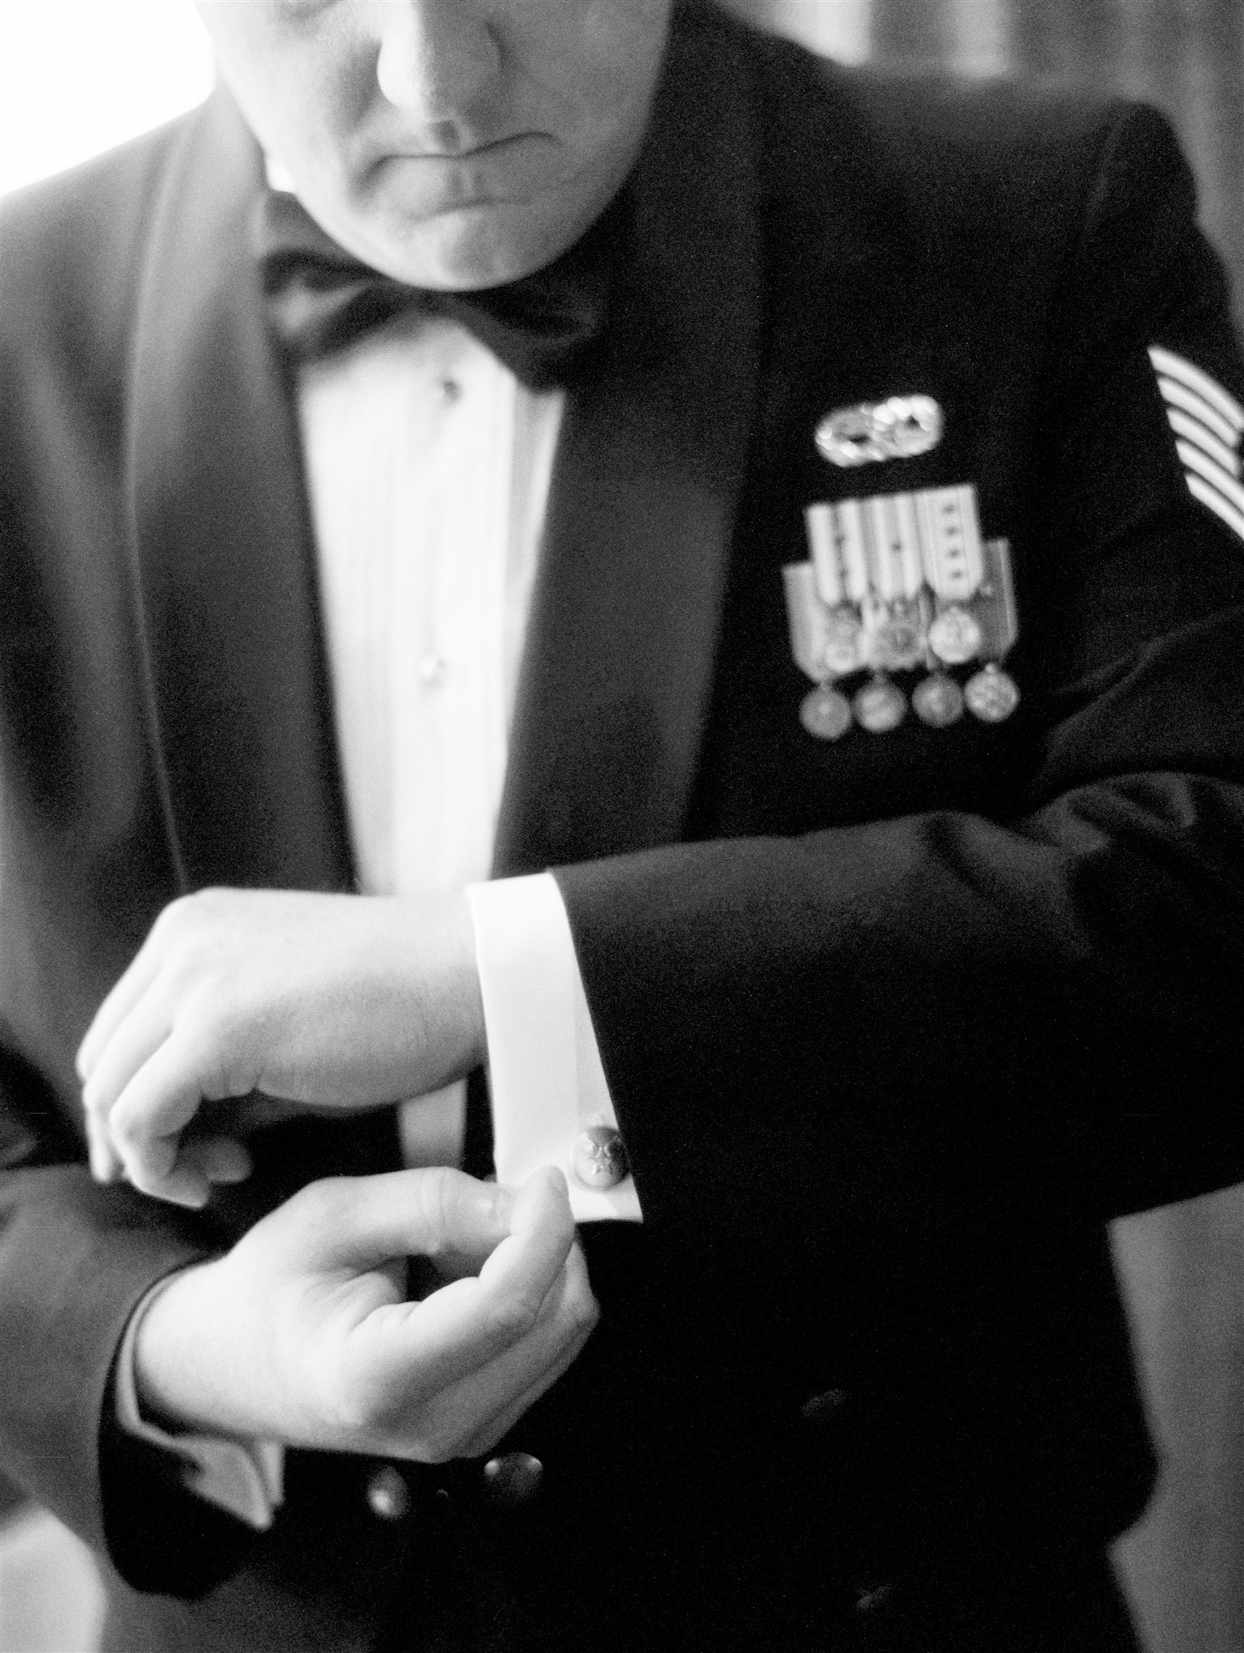 groom wearing uniform suit buttoning his sleeve